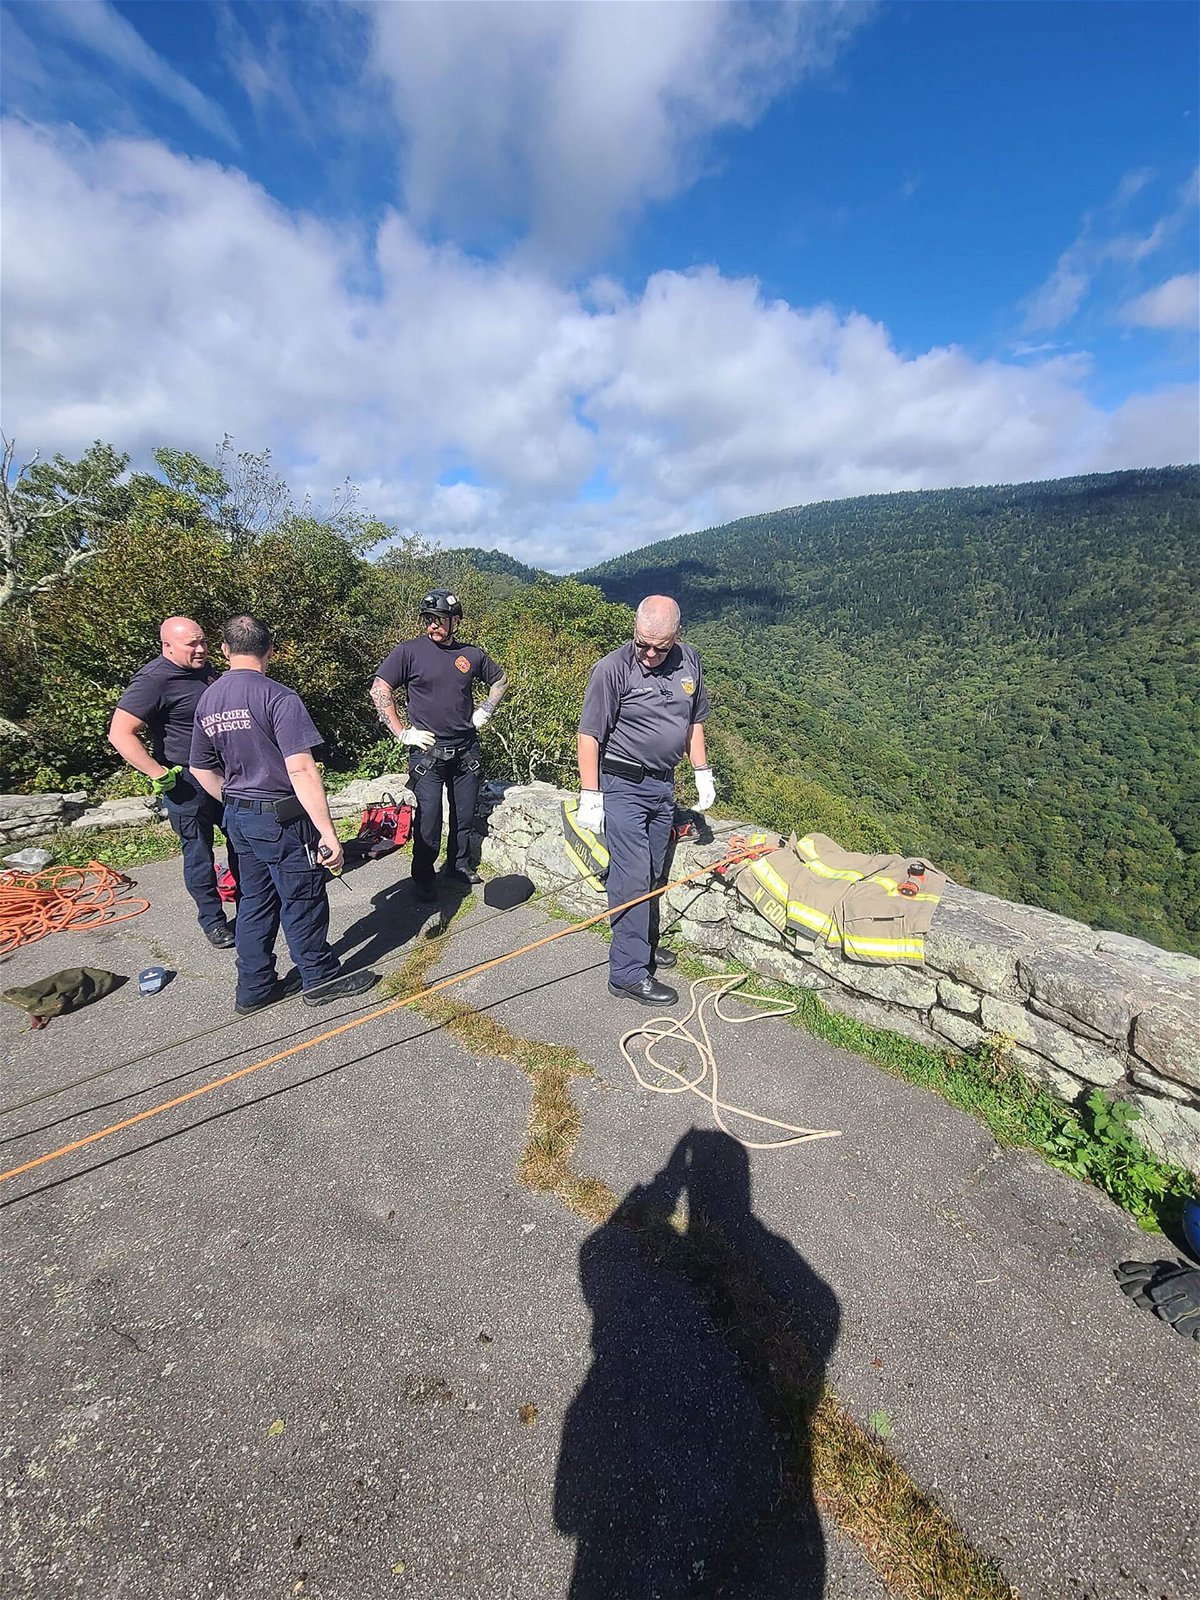 <i>Reems Creek Fire Department</i><br/>A 61-year-old woman died after falling roughly 150 feet from a steep cliff on the Blue Ridge Parkway in North Carolina. Reems Creek firefighters responded to the fatal cliff fall on September 23.